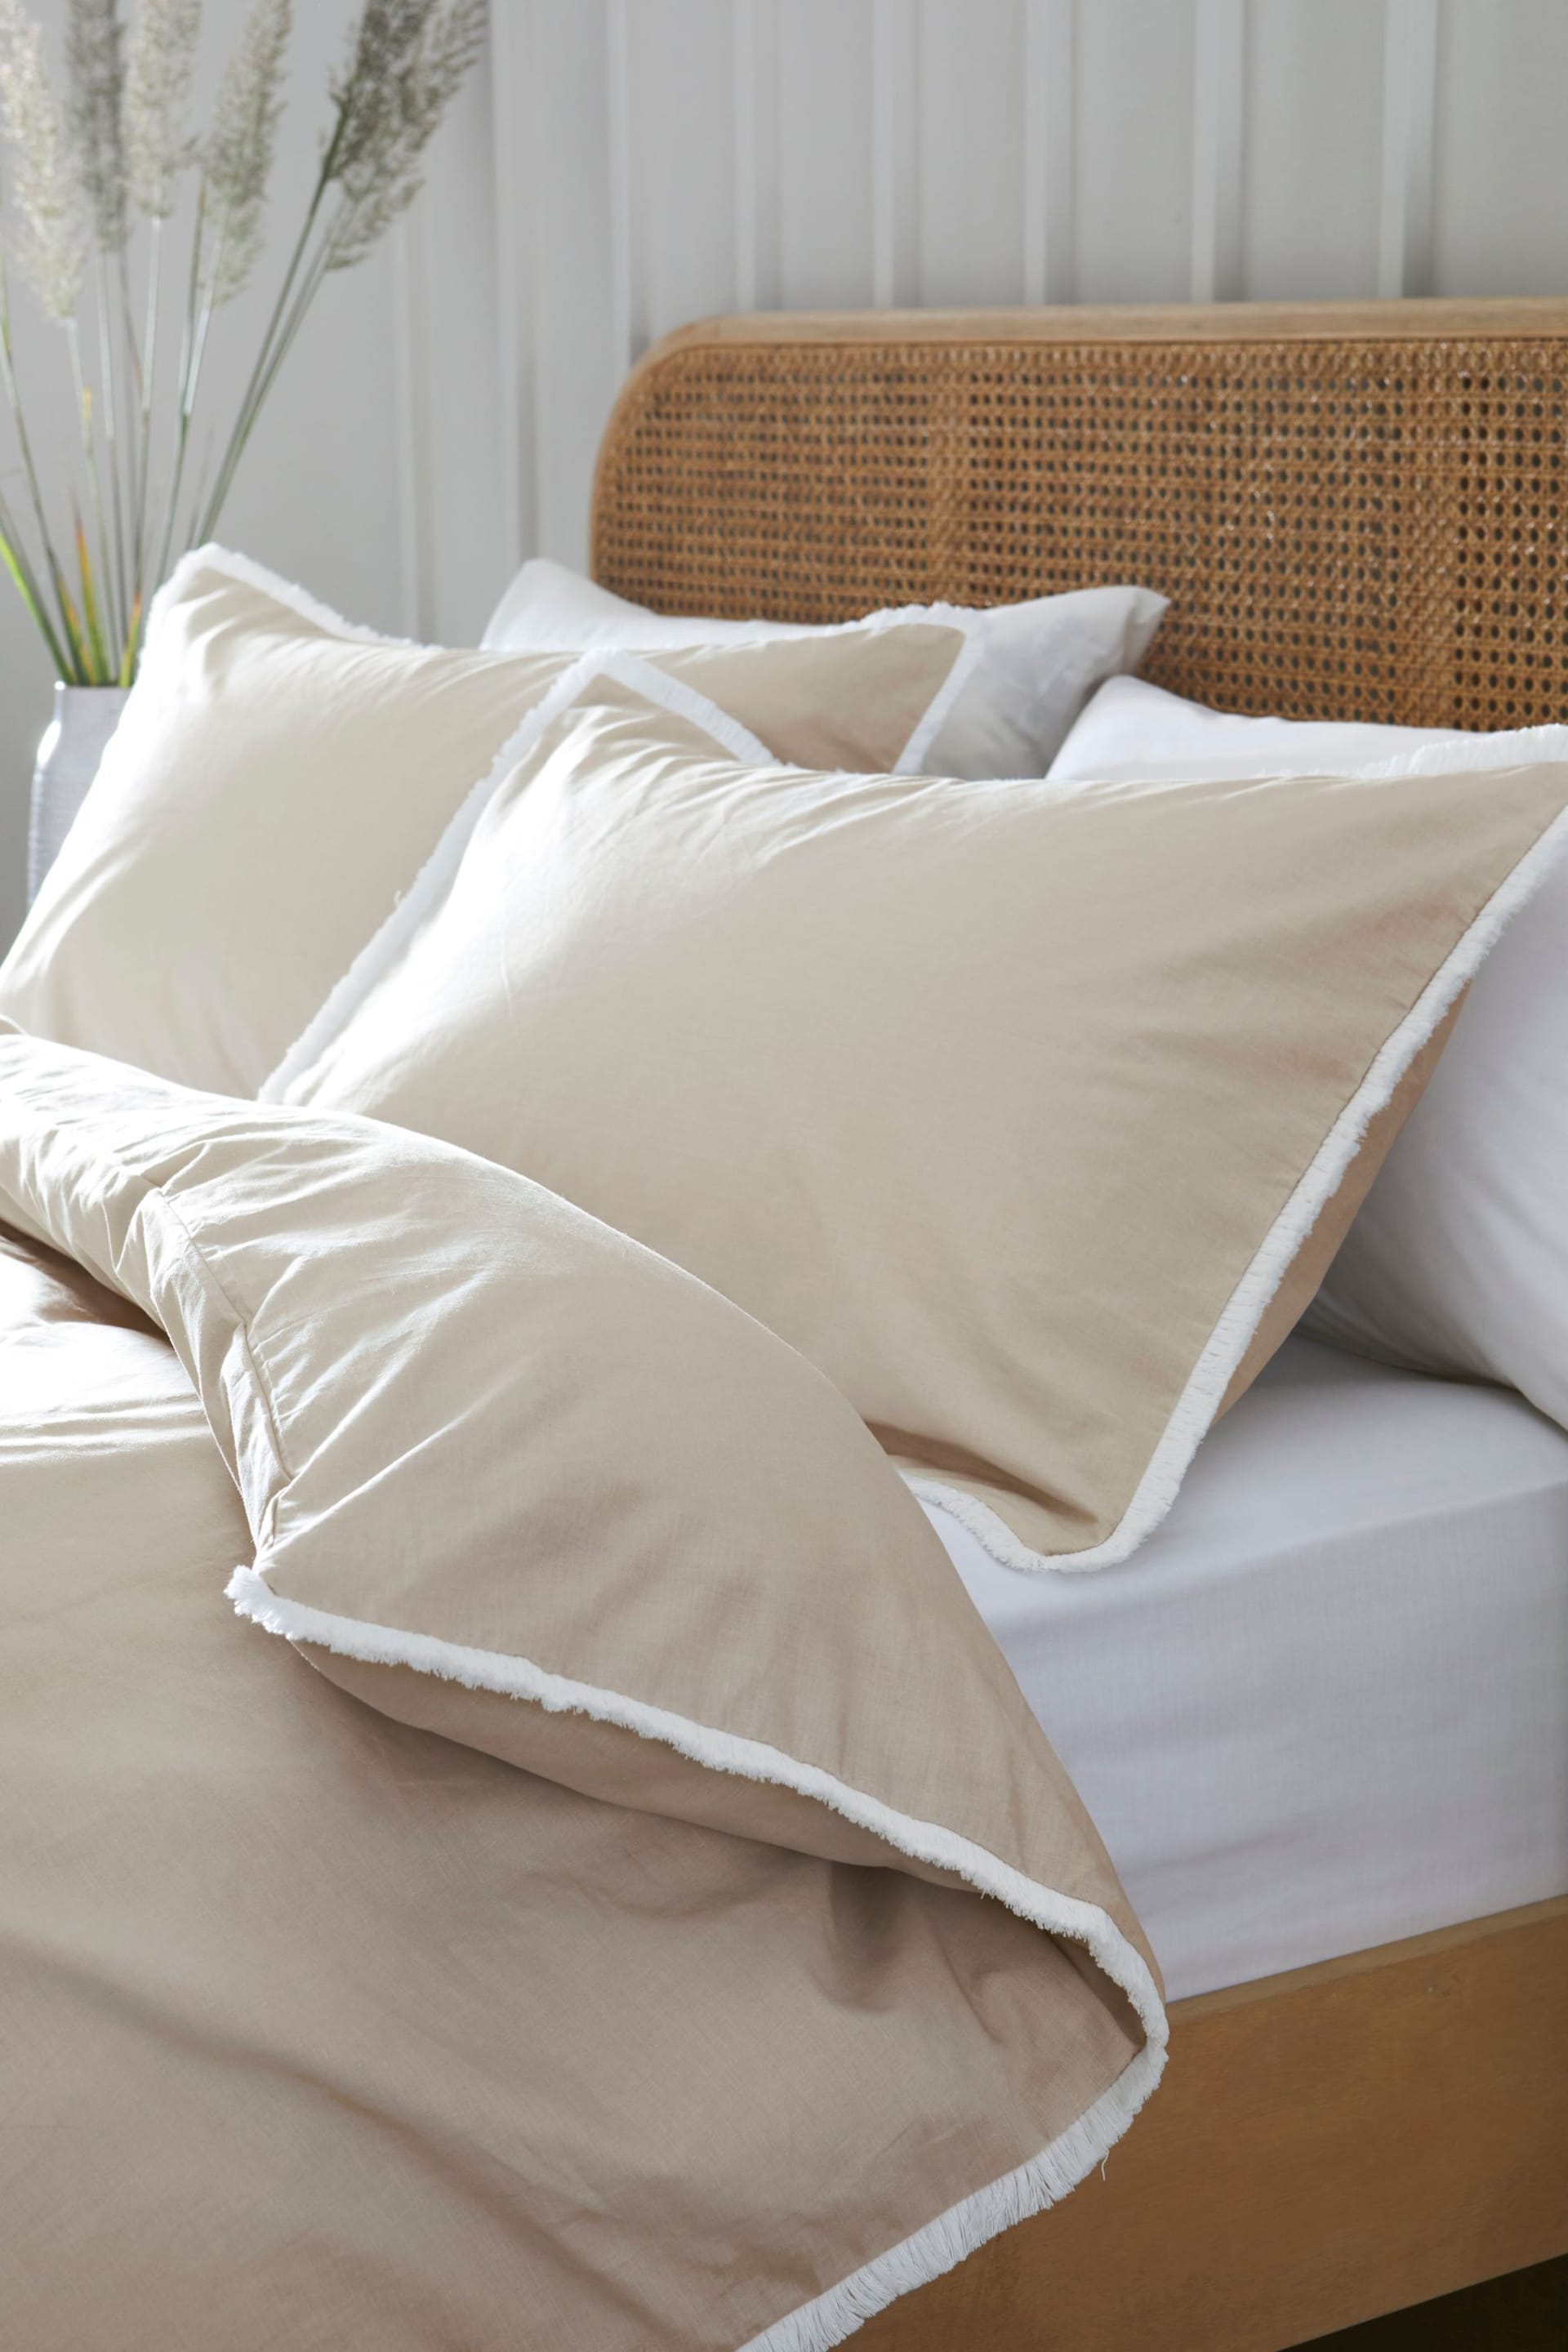 Natural Fringed Edge 100% Cotton Duvet Cover and Pillowcase Set - Image 2 of 5